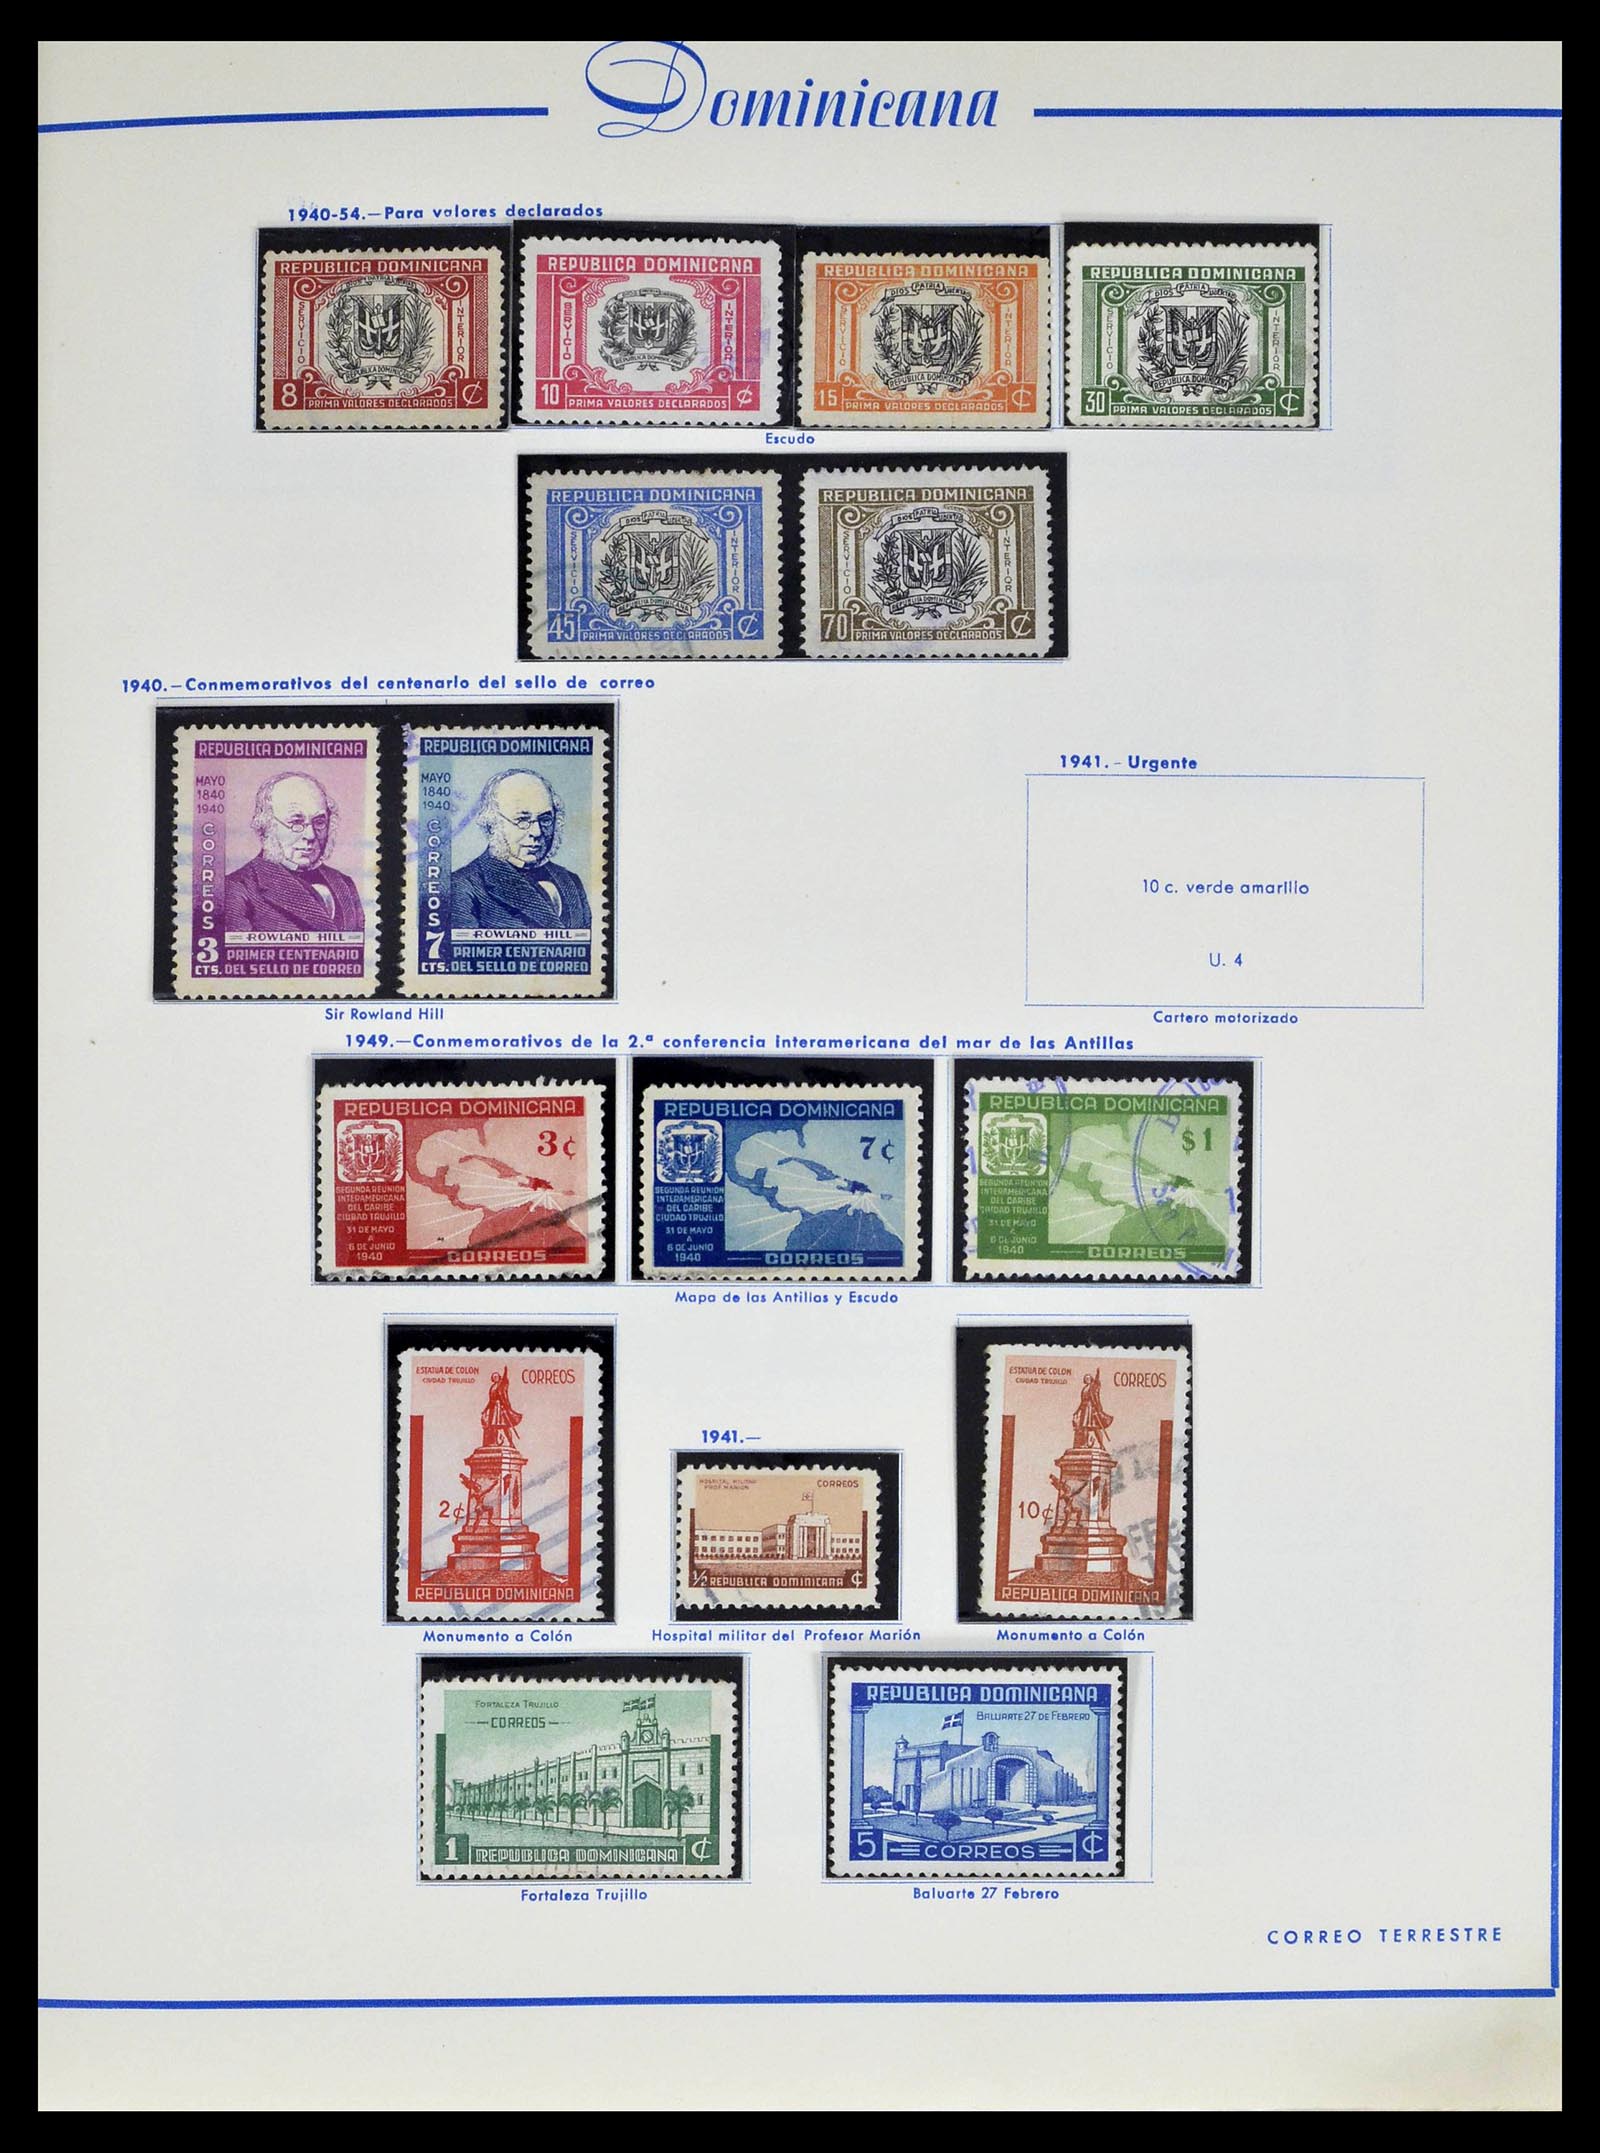 39216 0021 - Stamp collection 39216 Dominican Republic 1870-1982.